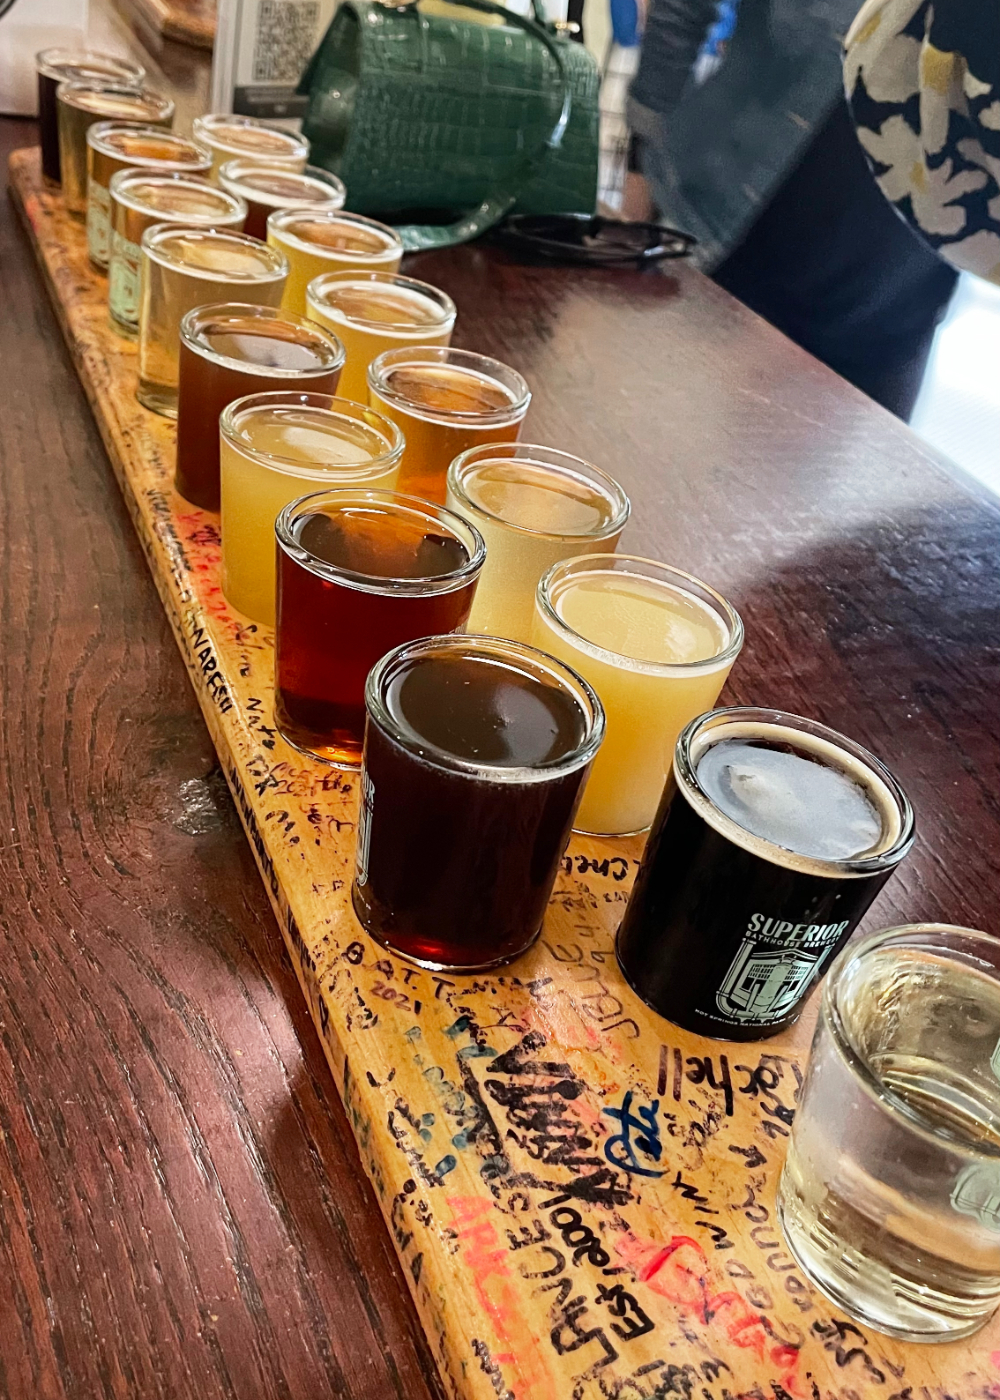 Beer Bath flight at Bathhouse Brewery in Hot SPrings